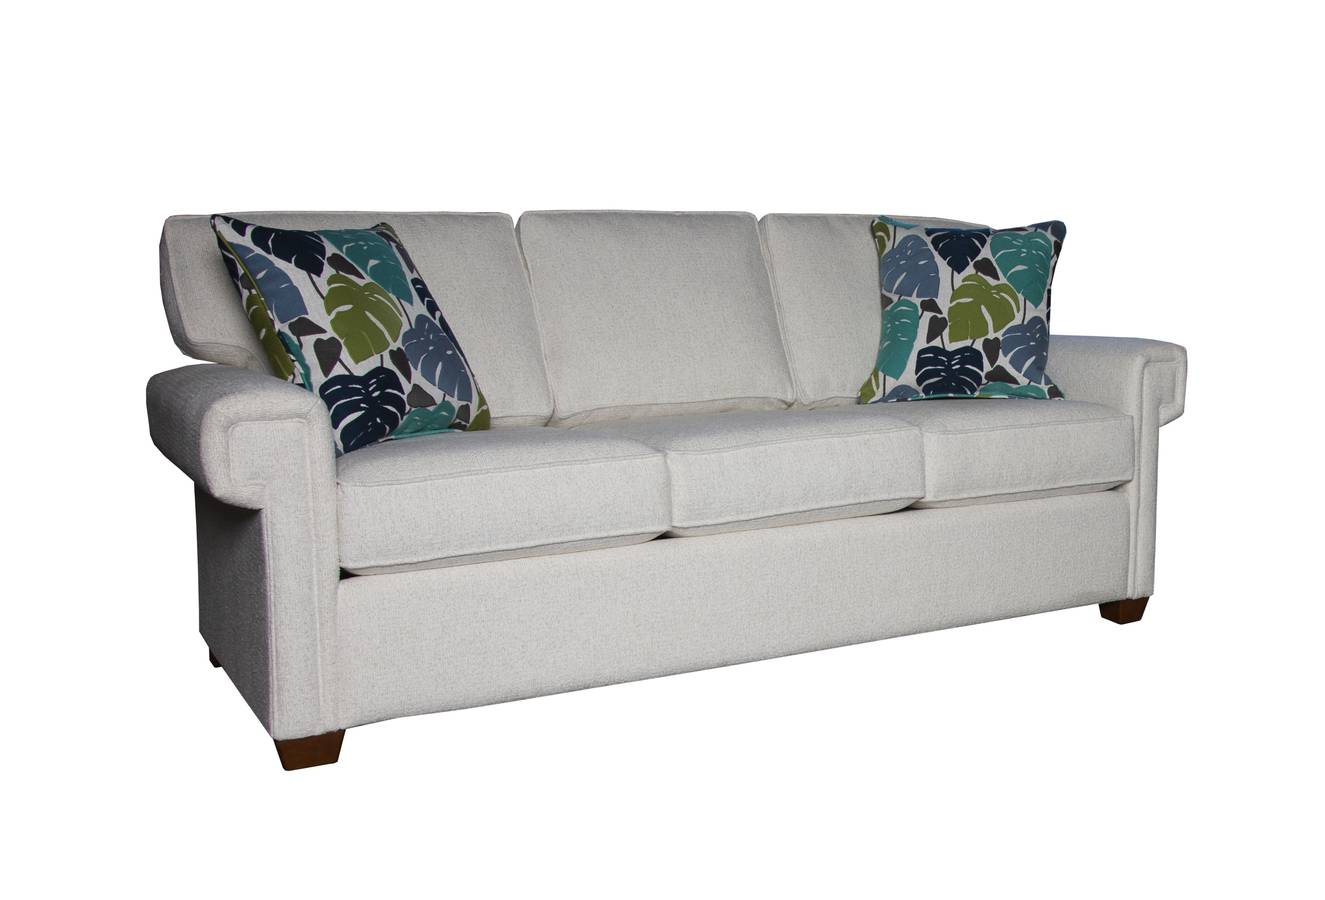 S259 Upholstered Sofa by Capris Furniture